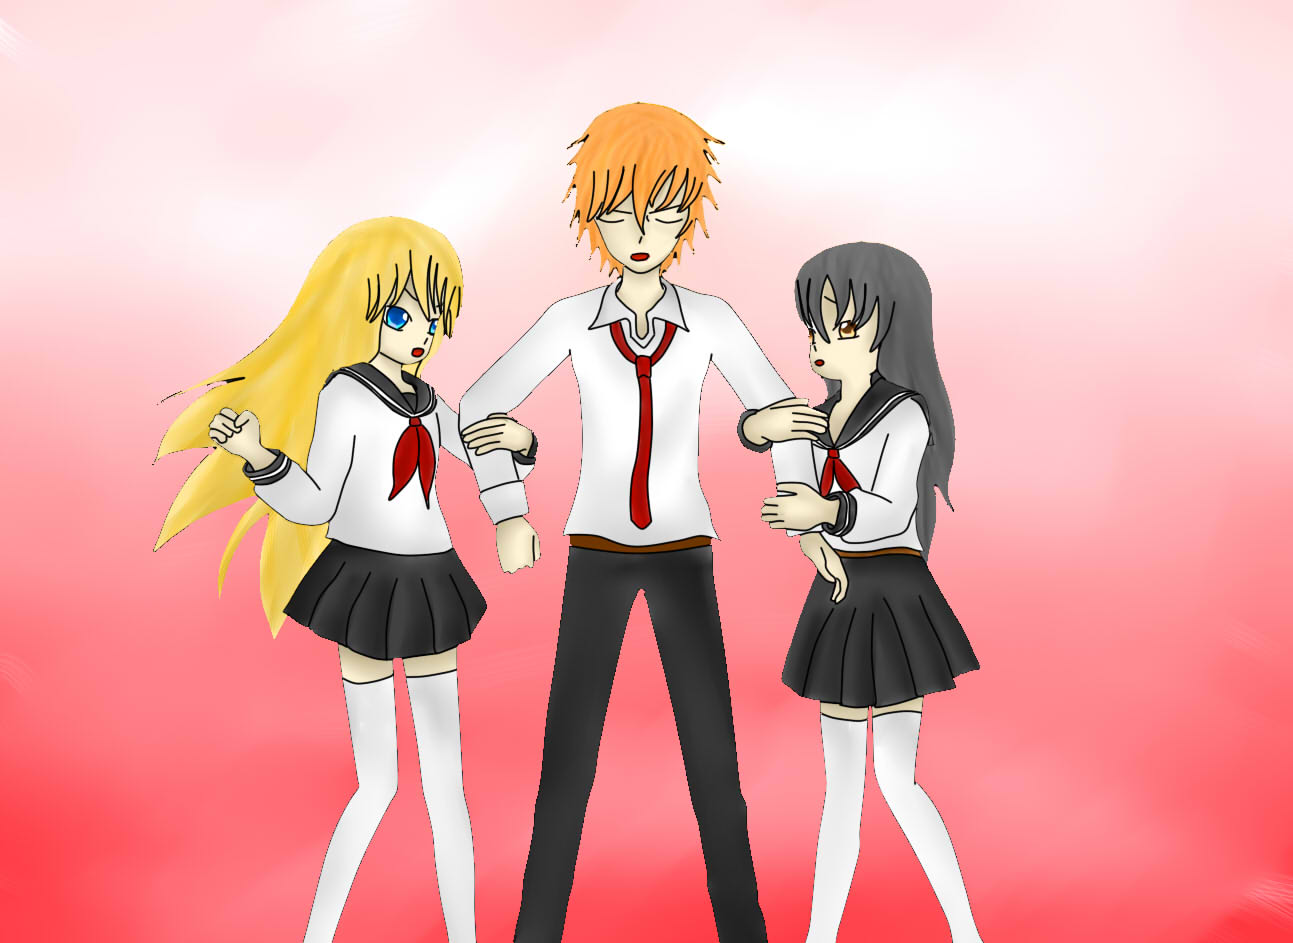 Love Triangle HM By Chelsea701 On DeviantArt